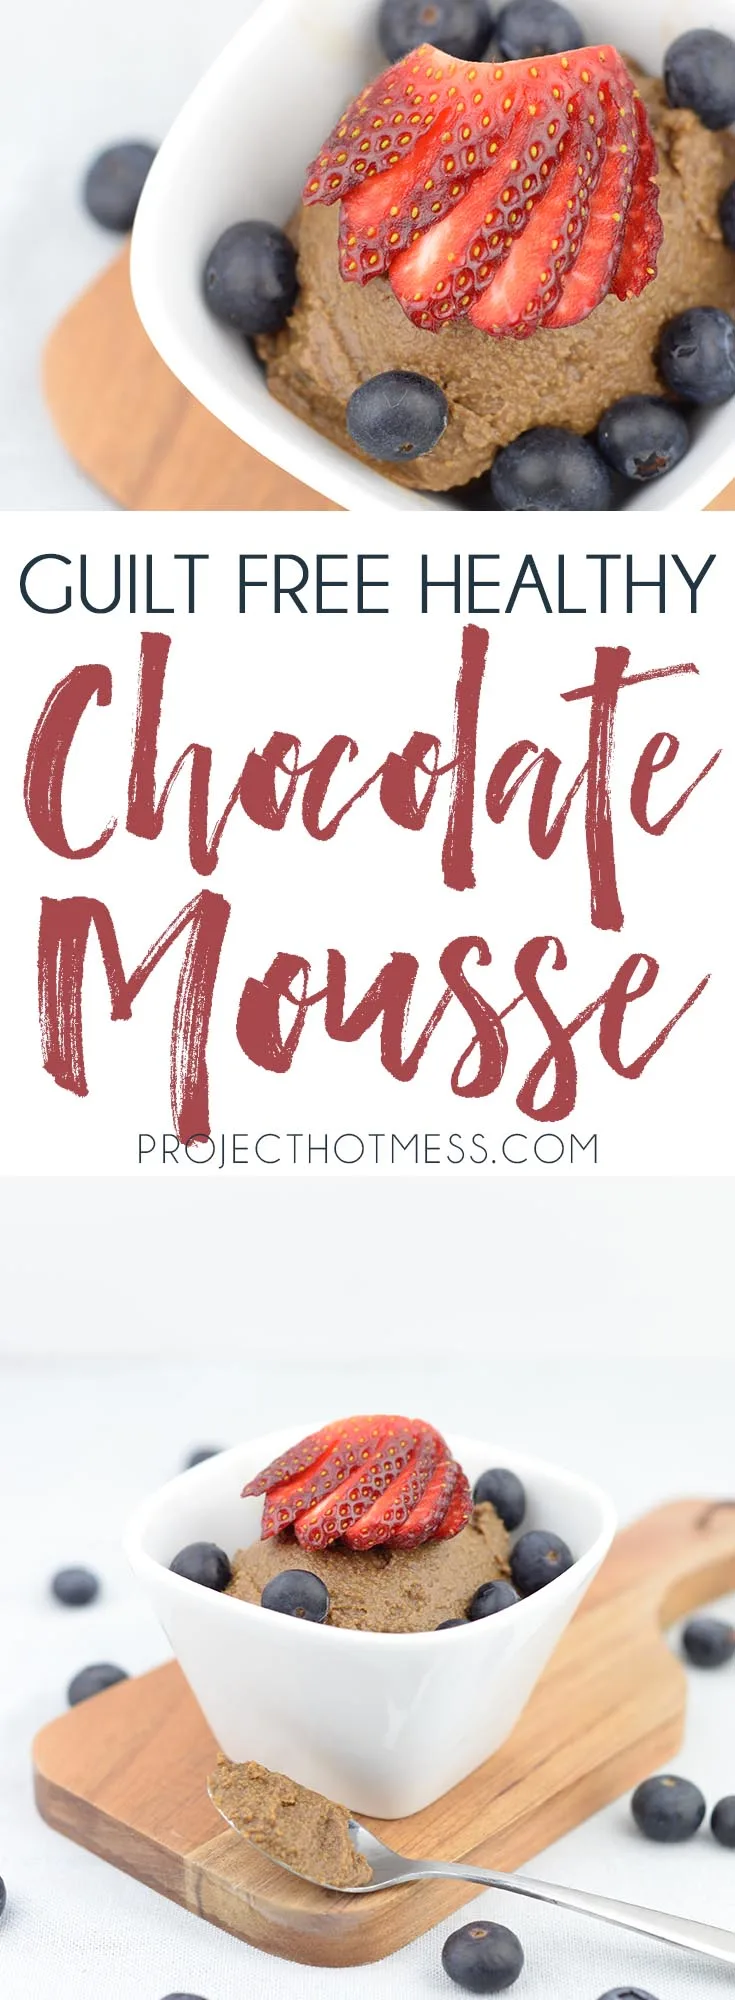 There's no need to avoid indulging in sweet treats when trying to eat healthily. This amazing guilt free, healthy chocolate mousse has you covered. Chocolate | Chocolate Recipe | Chocolate Dessert | Chocolate Treat | Raw Dessert | Paleo Dessert | Healthy Dessert | Vegan Dessert | Vegan Recipe | Raw Recipe | Healthy Recipe | Healthy Chocolate | Avocado Mousse | Paleo Mousse | Vegan Mousse | Keto Recipe | Keto Desserts | LCHF